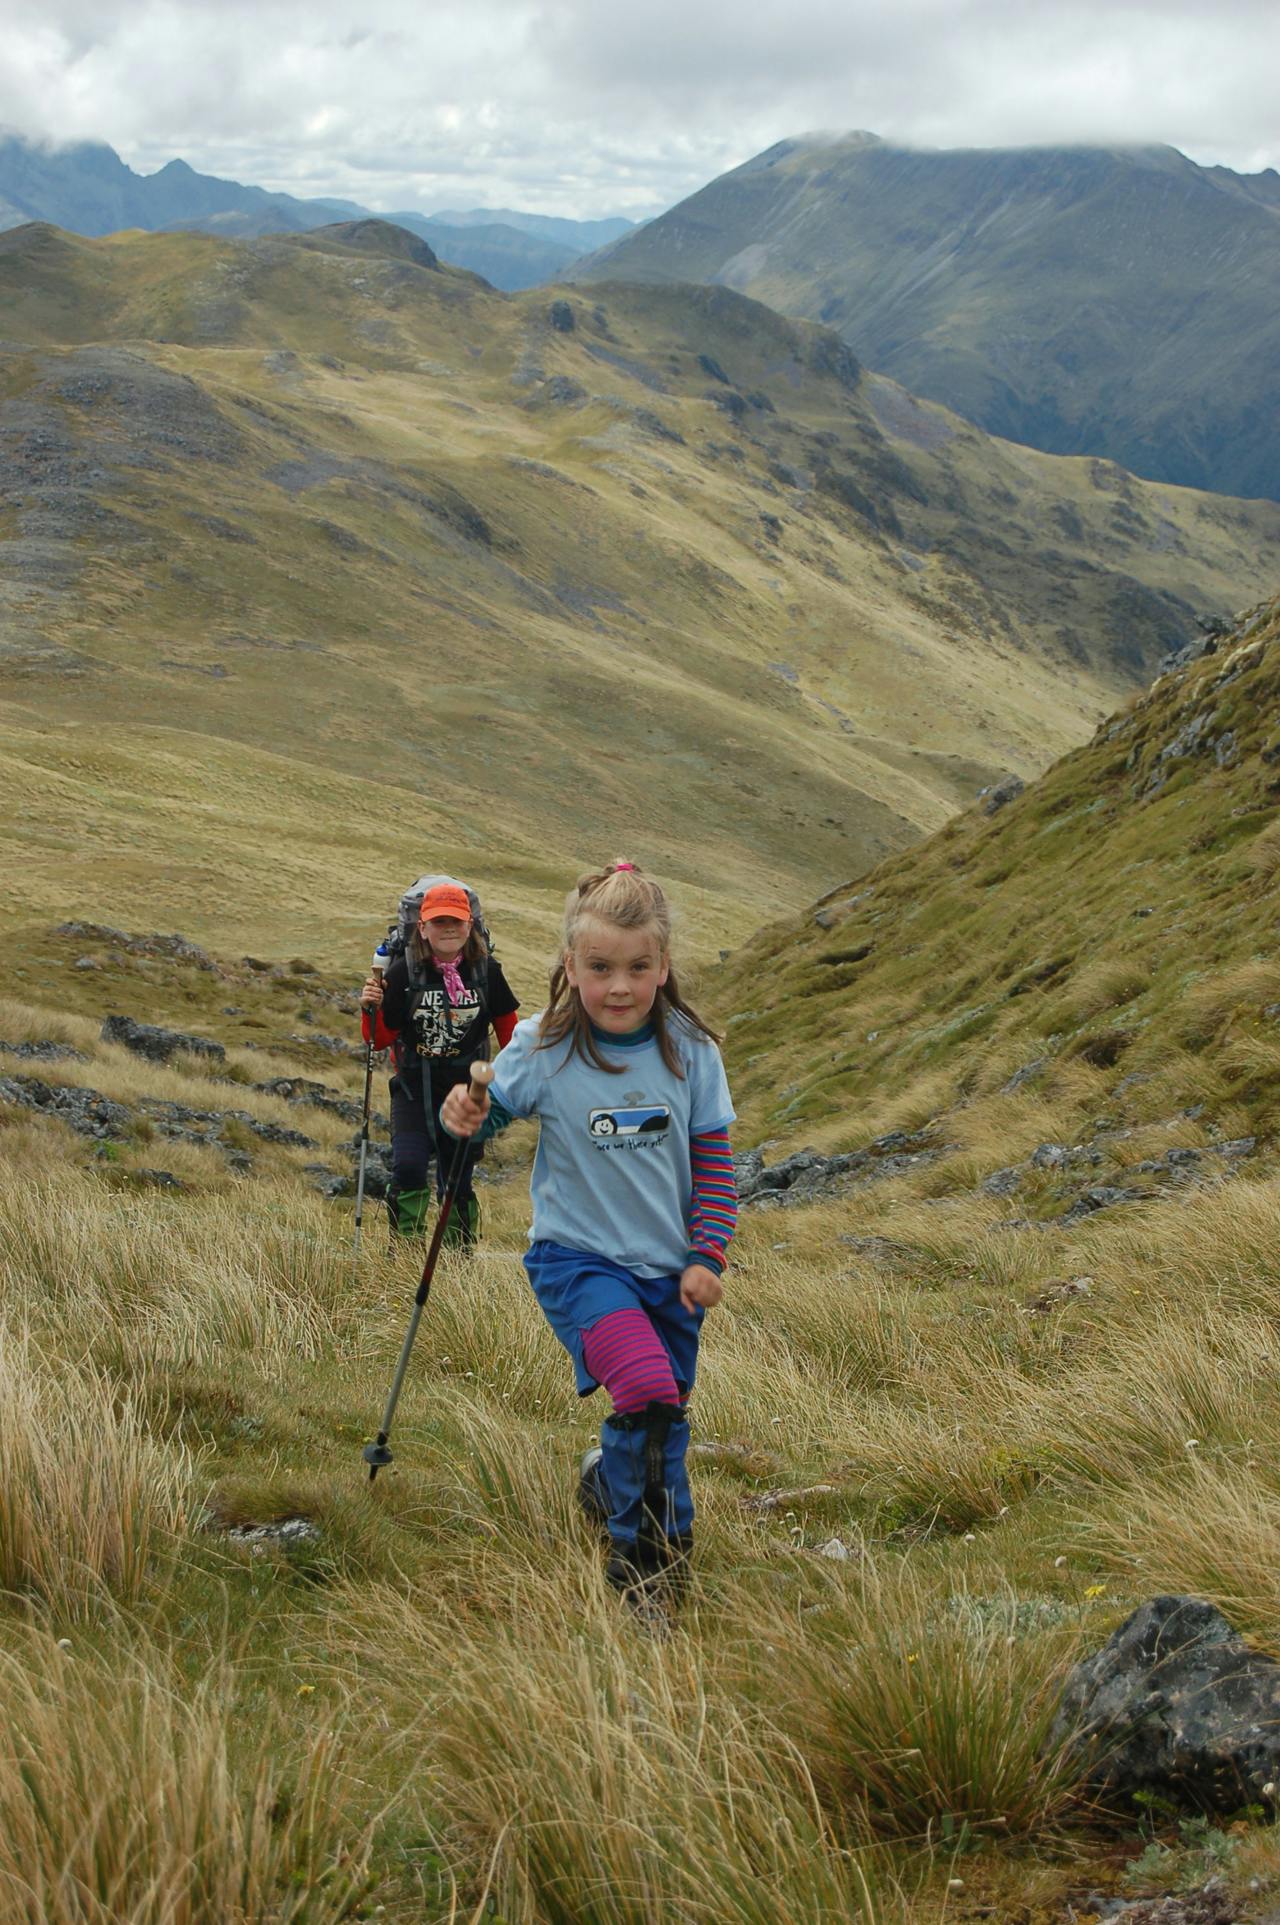 Mackenzie (in foreground) and Alice approach a low saddle on the ridge. Photo: Jo Stilwell